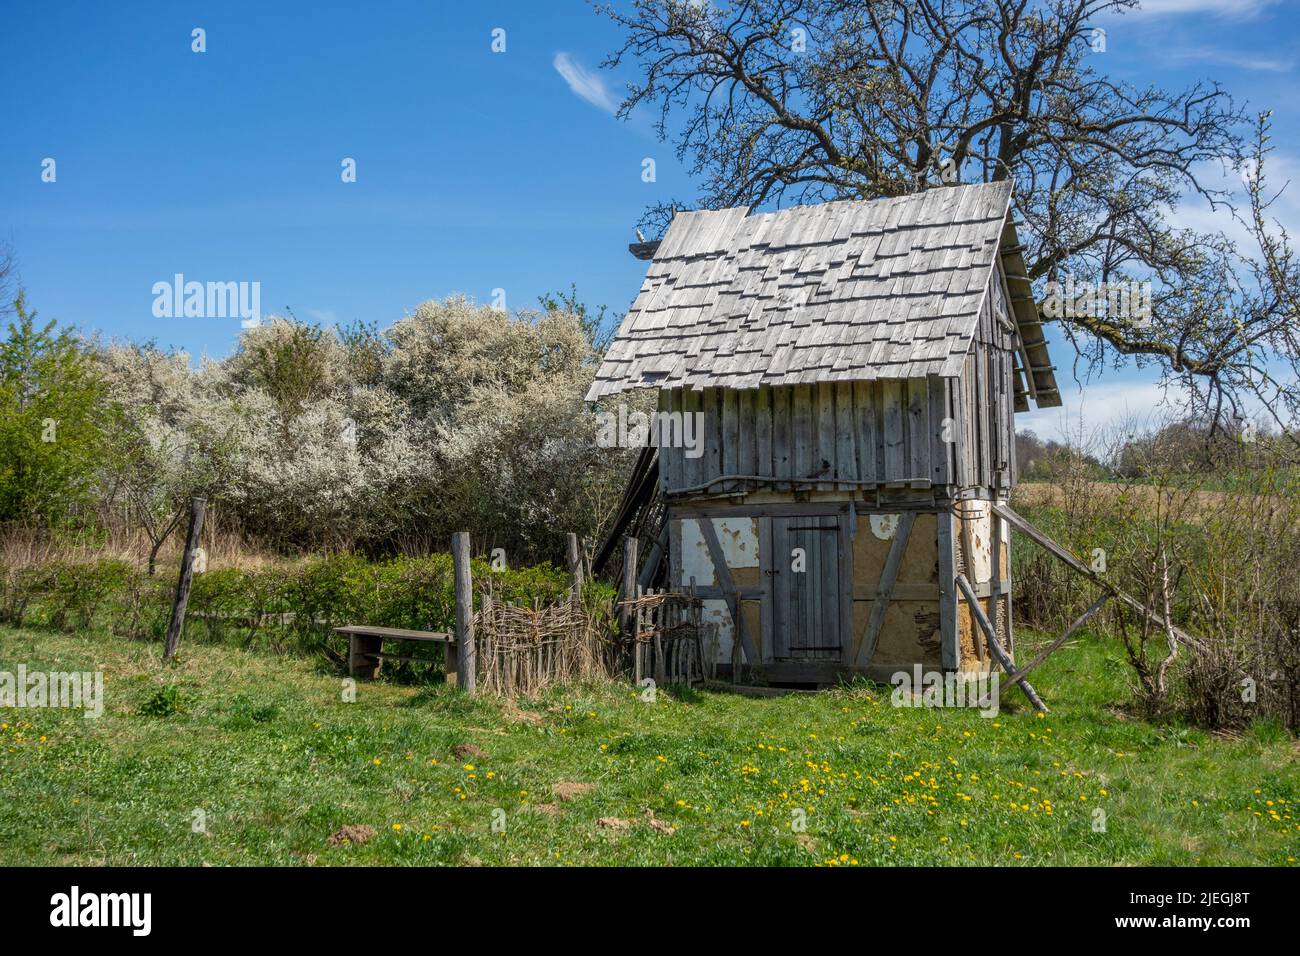 Medieval wooden hut in sunny ambiance at early spring time Stock Photo